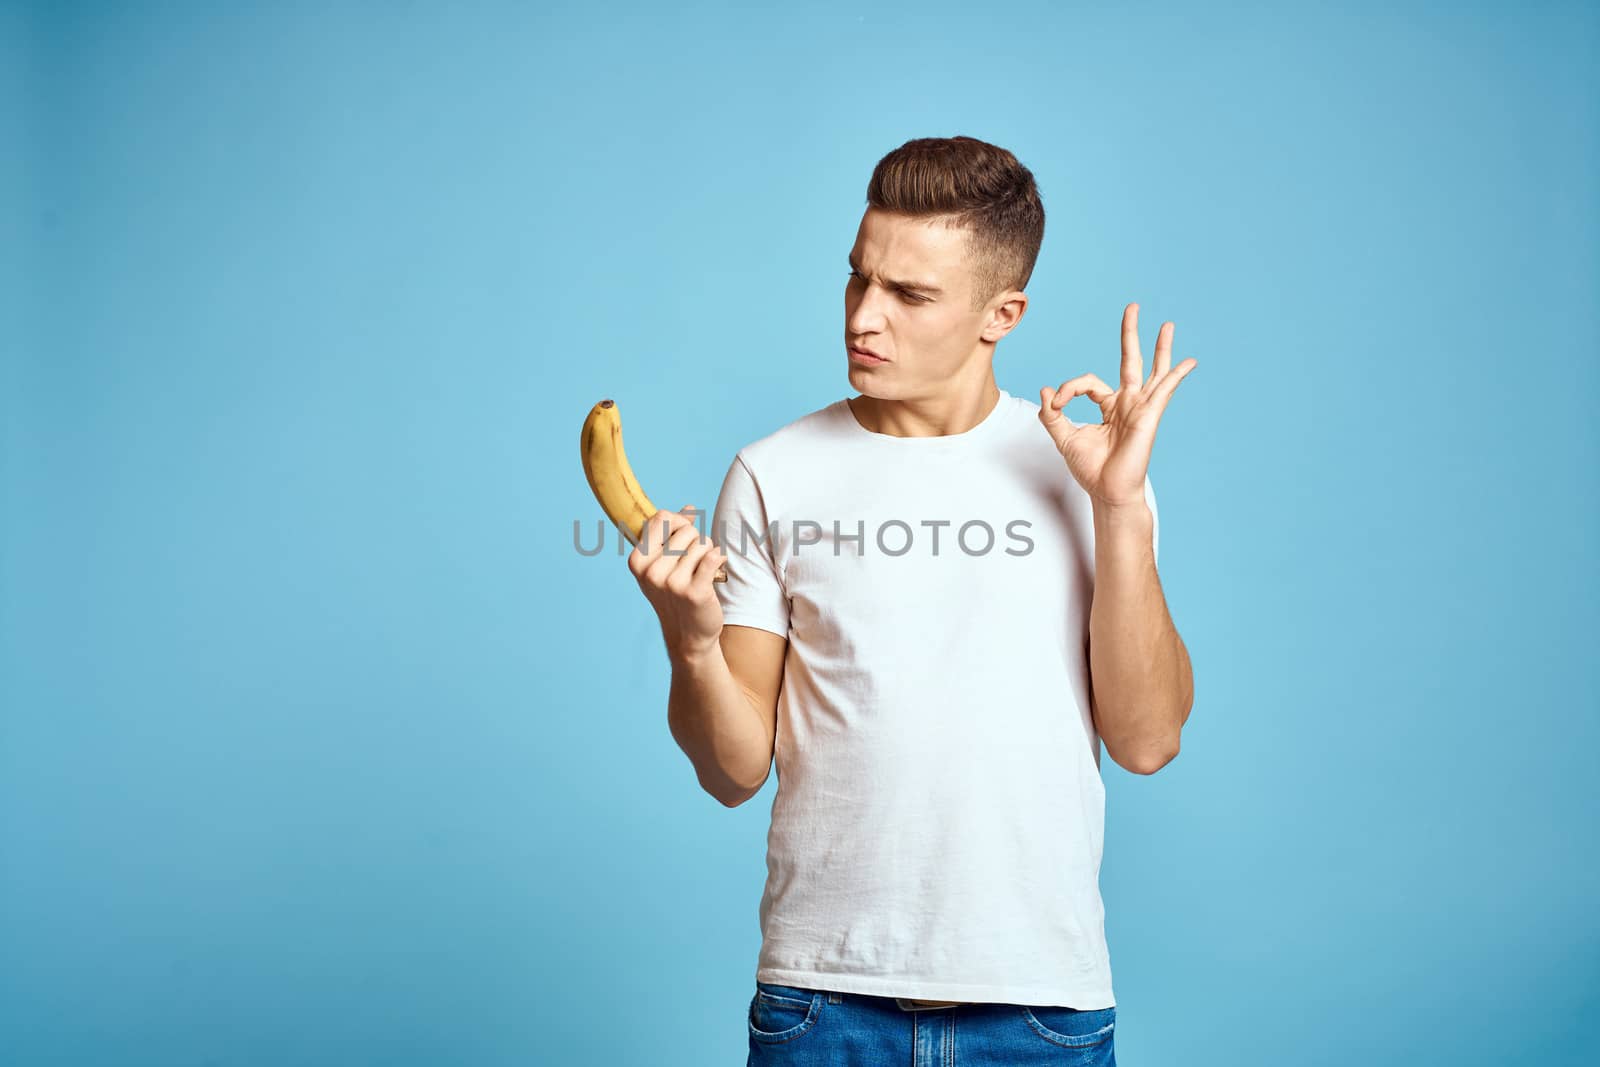 Happy man with fresh fruits gesturing with hands blue background white t-shirt vitamins bananas High quality photo